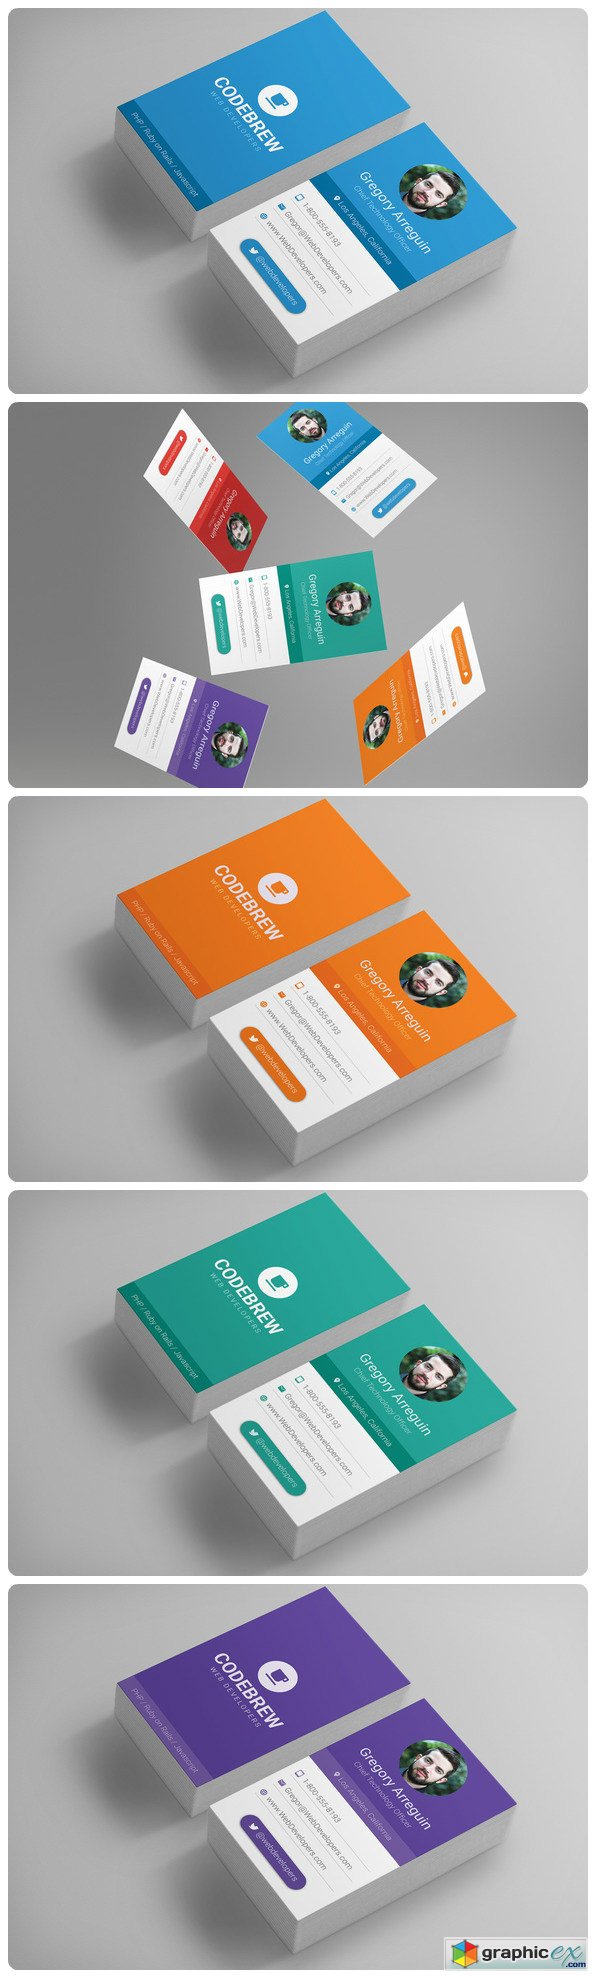 Material Design Business Cards